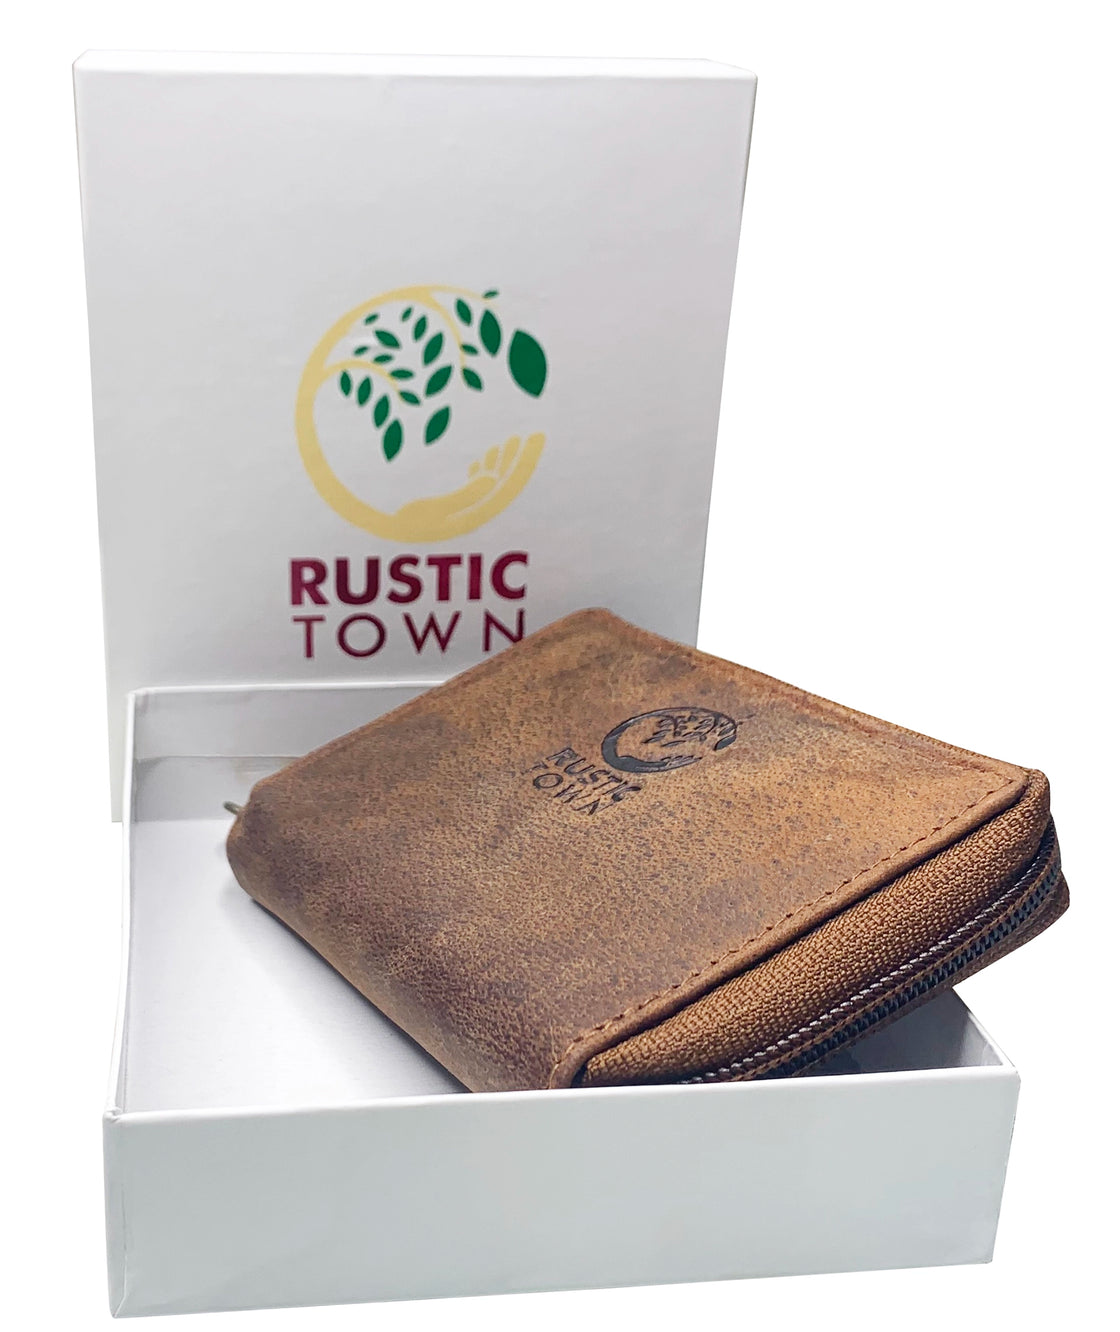 Slim Compact Key Holder Key Pouch – Rustic Town